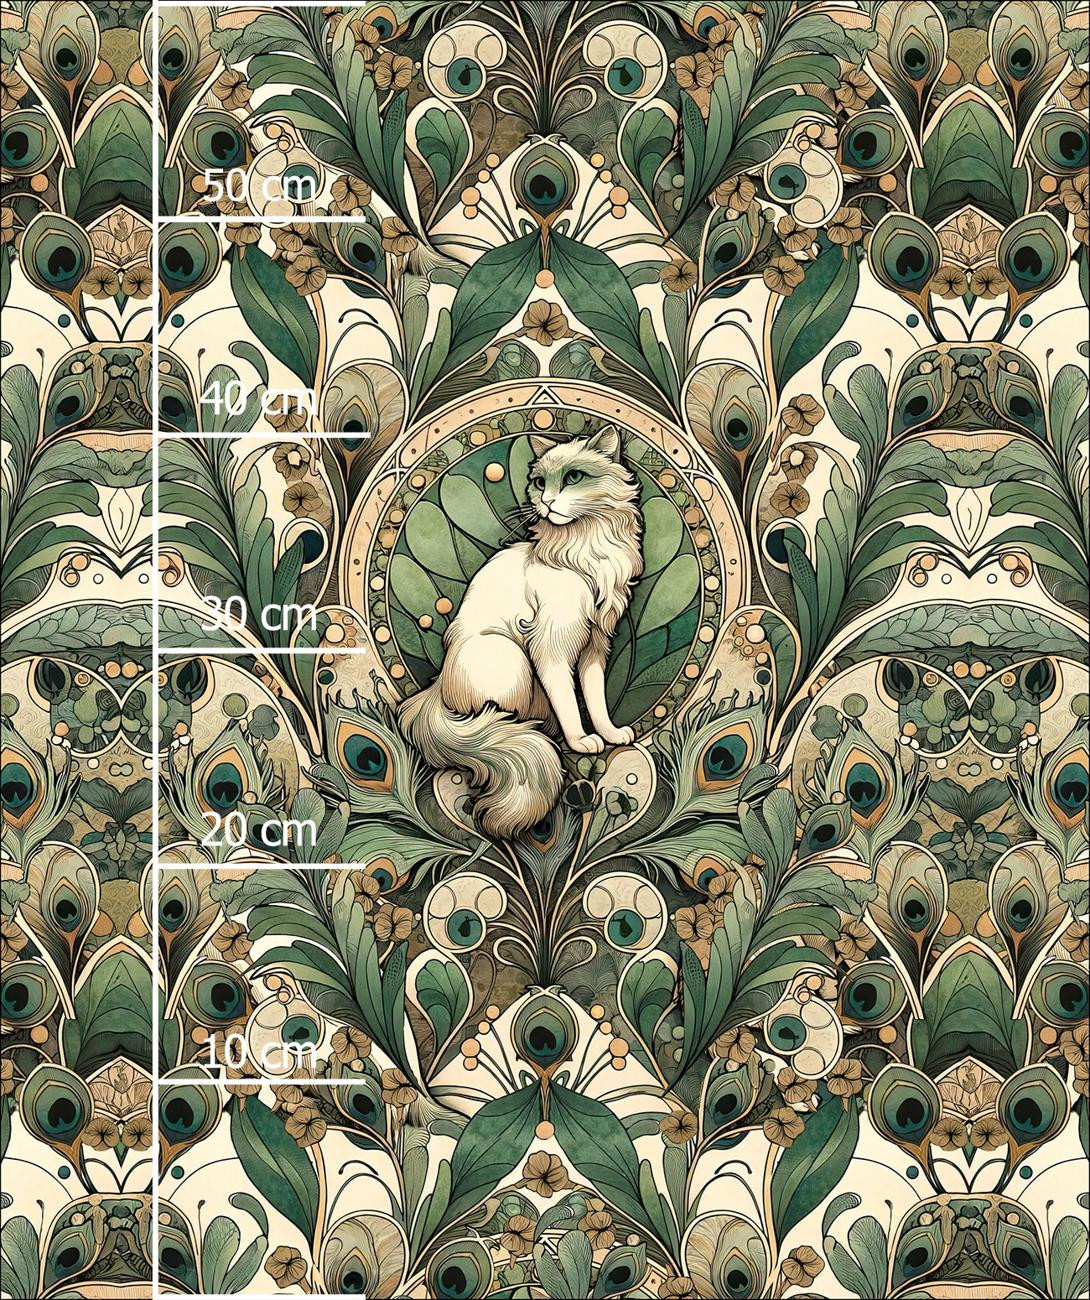 ART NOUVEAU CATS & FLOWERS PAT. 1 -  PANEL (60cm x 50cm) brushed knitwear with elastane ITY